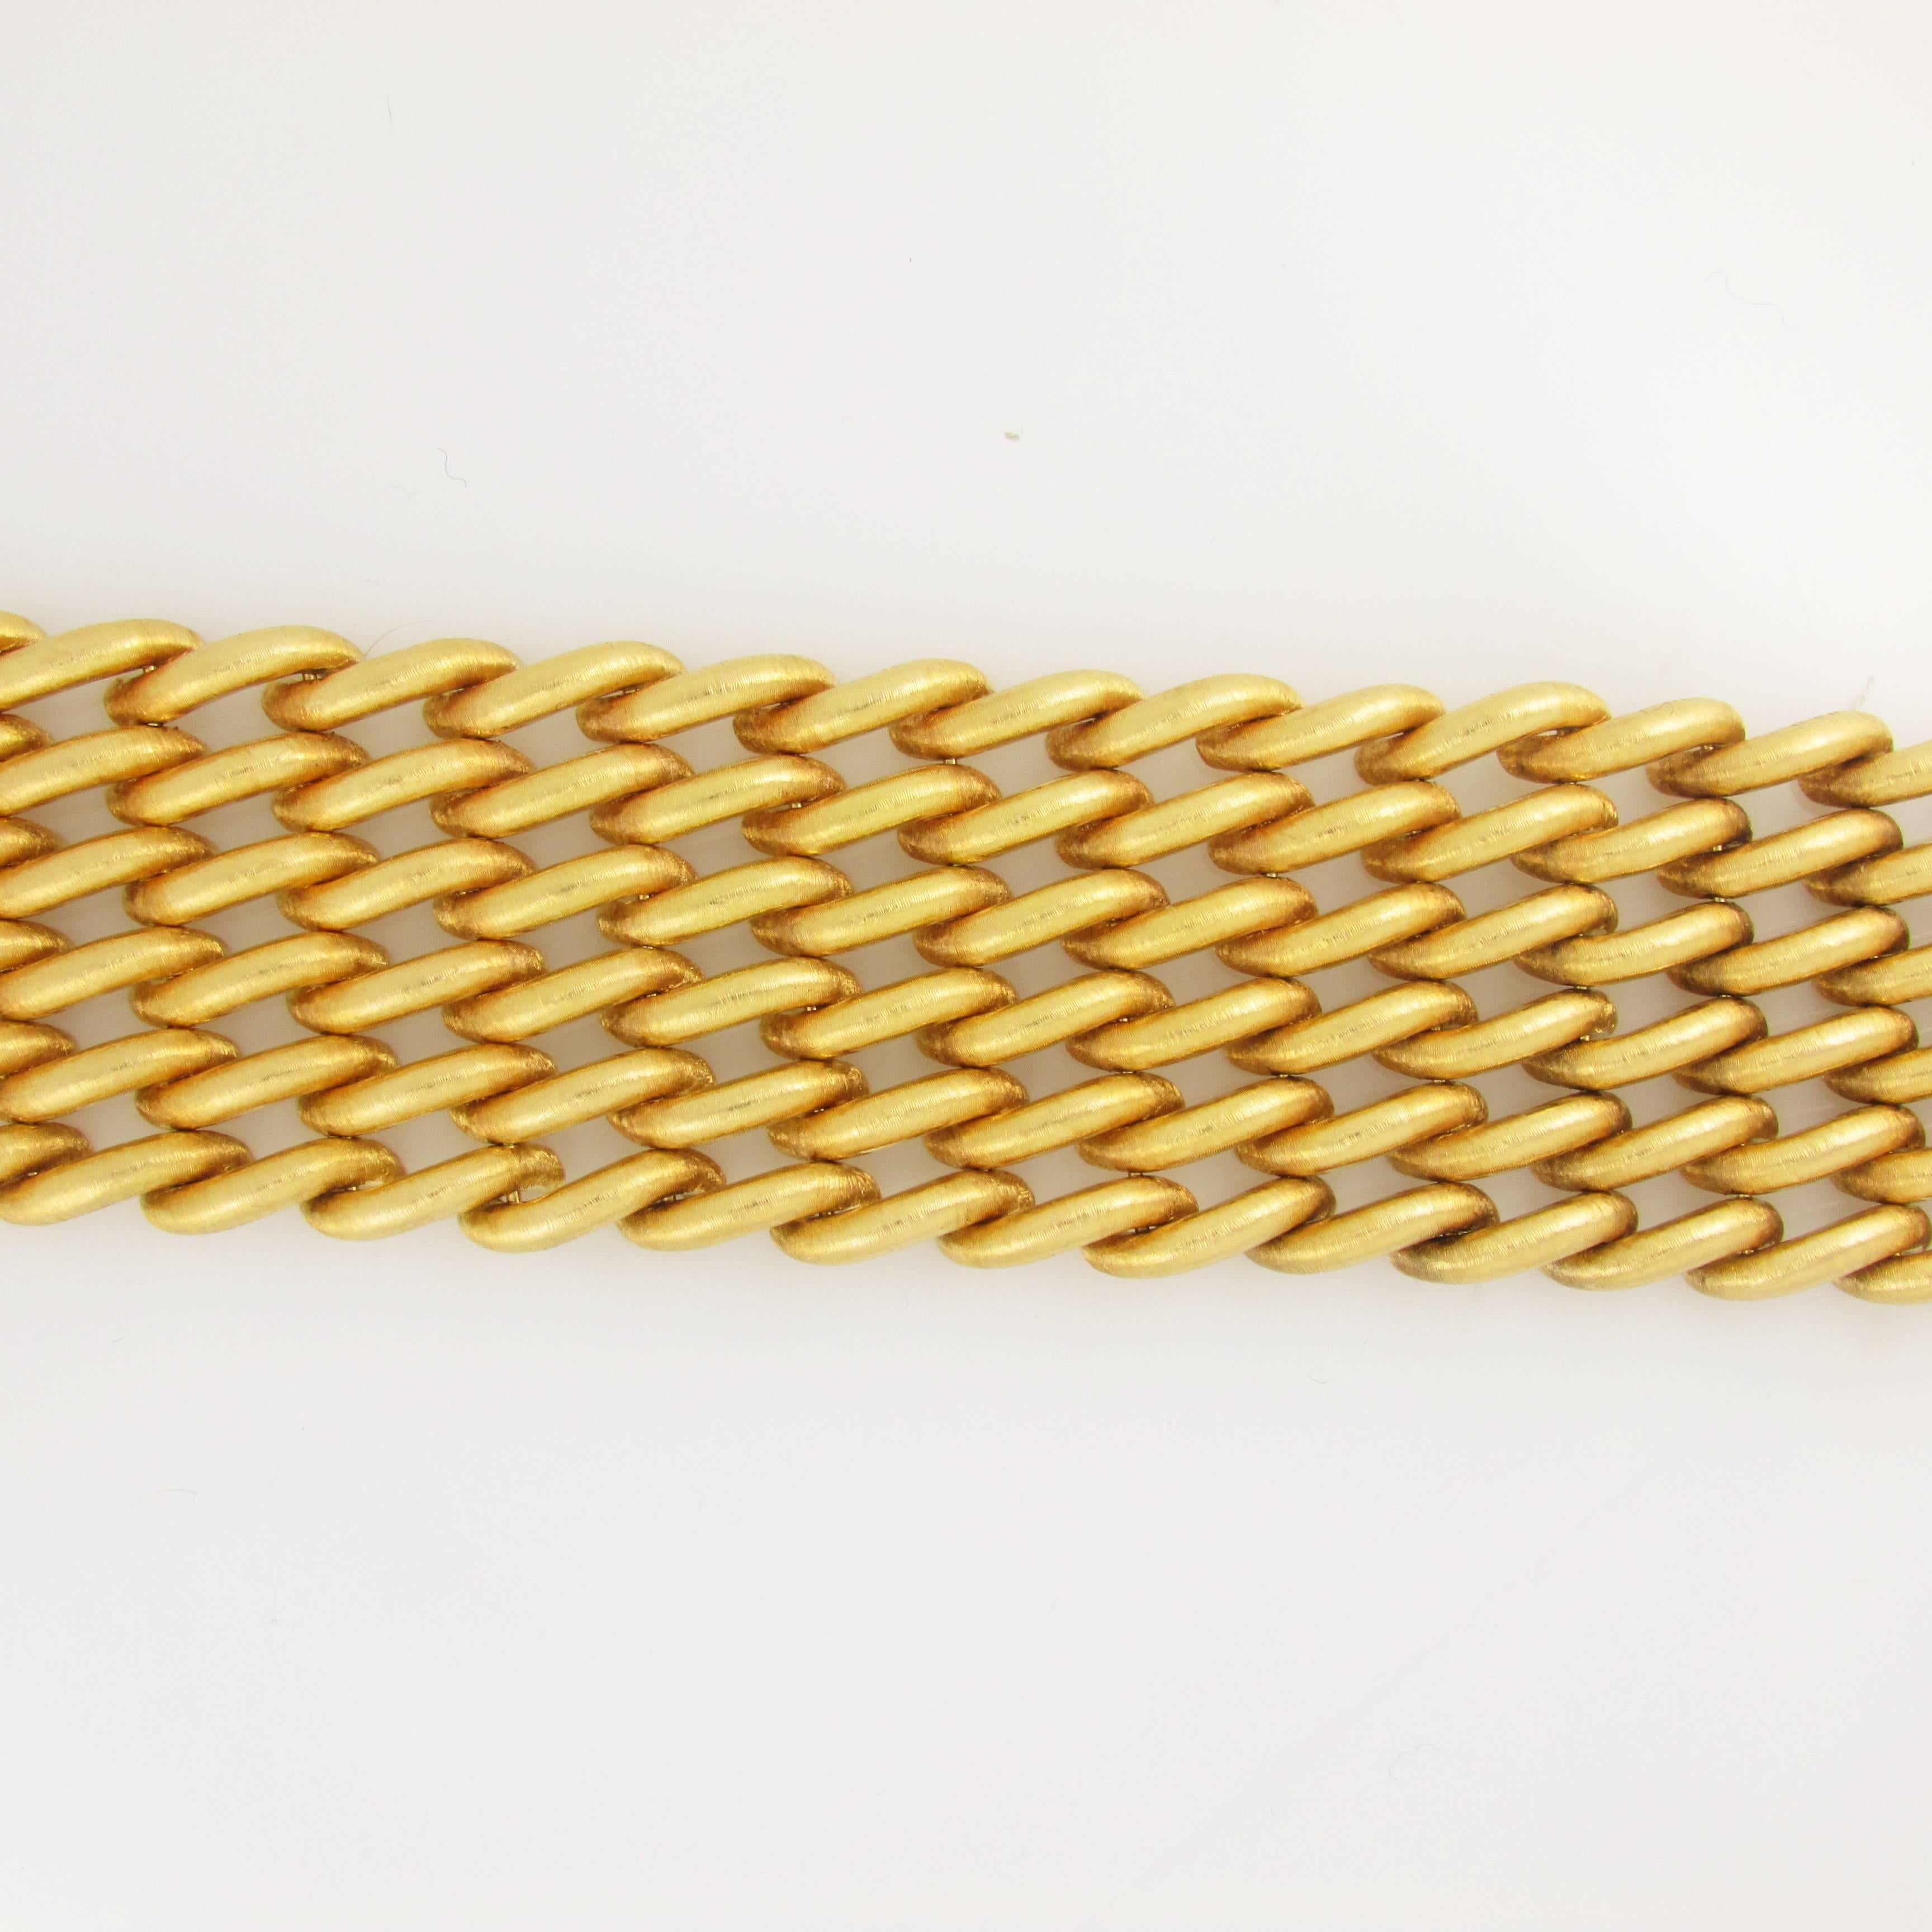 18KT yellow gold, wide, textured, link bracelet. 1.5 inches wide, 7.75 inches long. Signed M. Buccellati. 